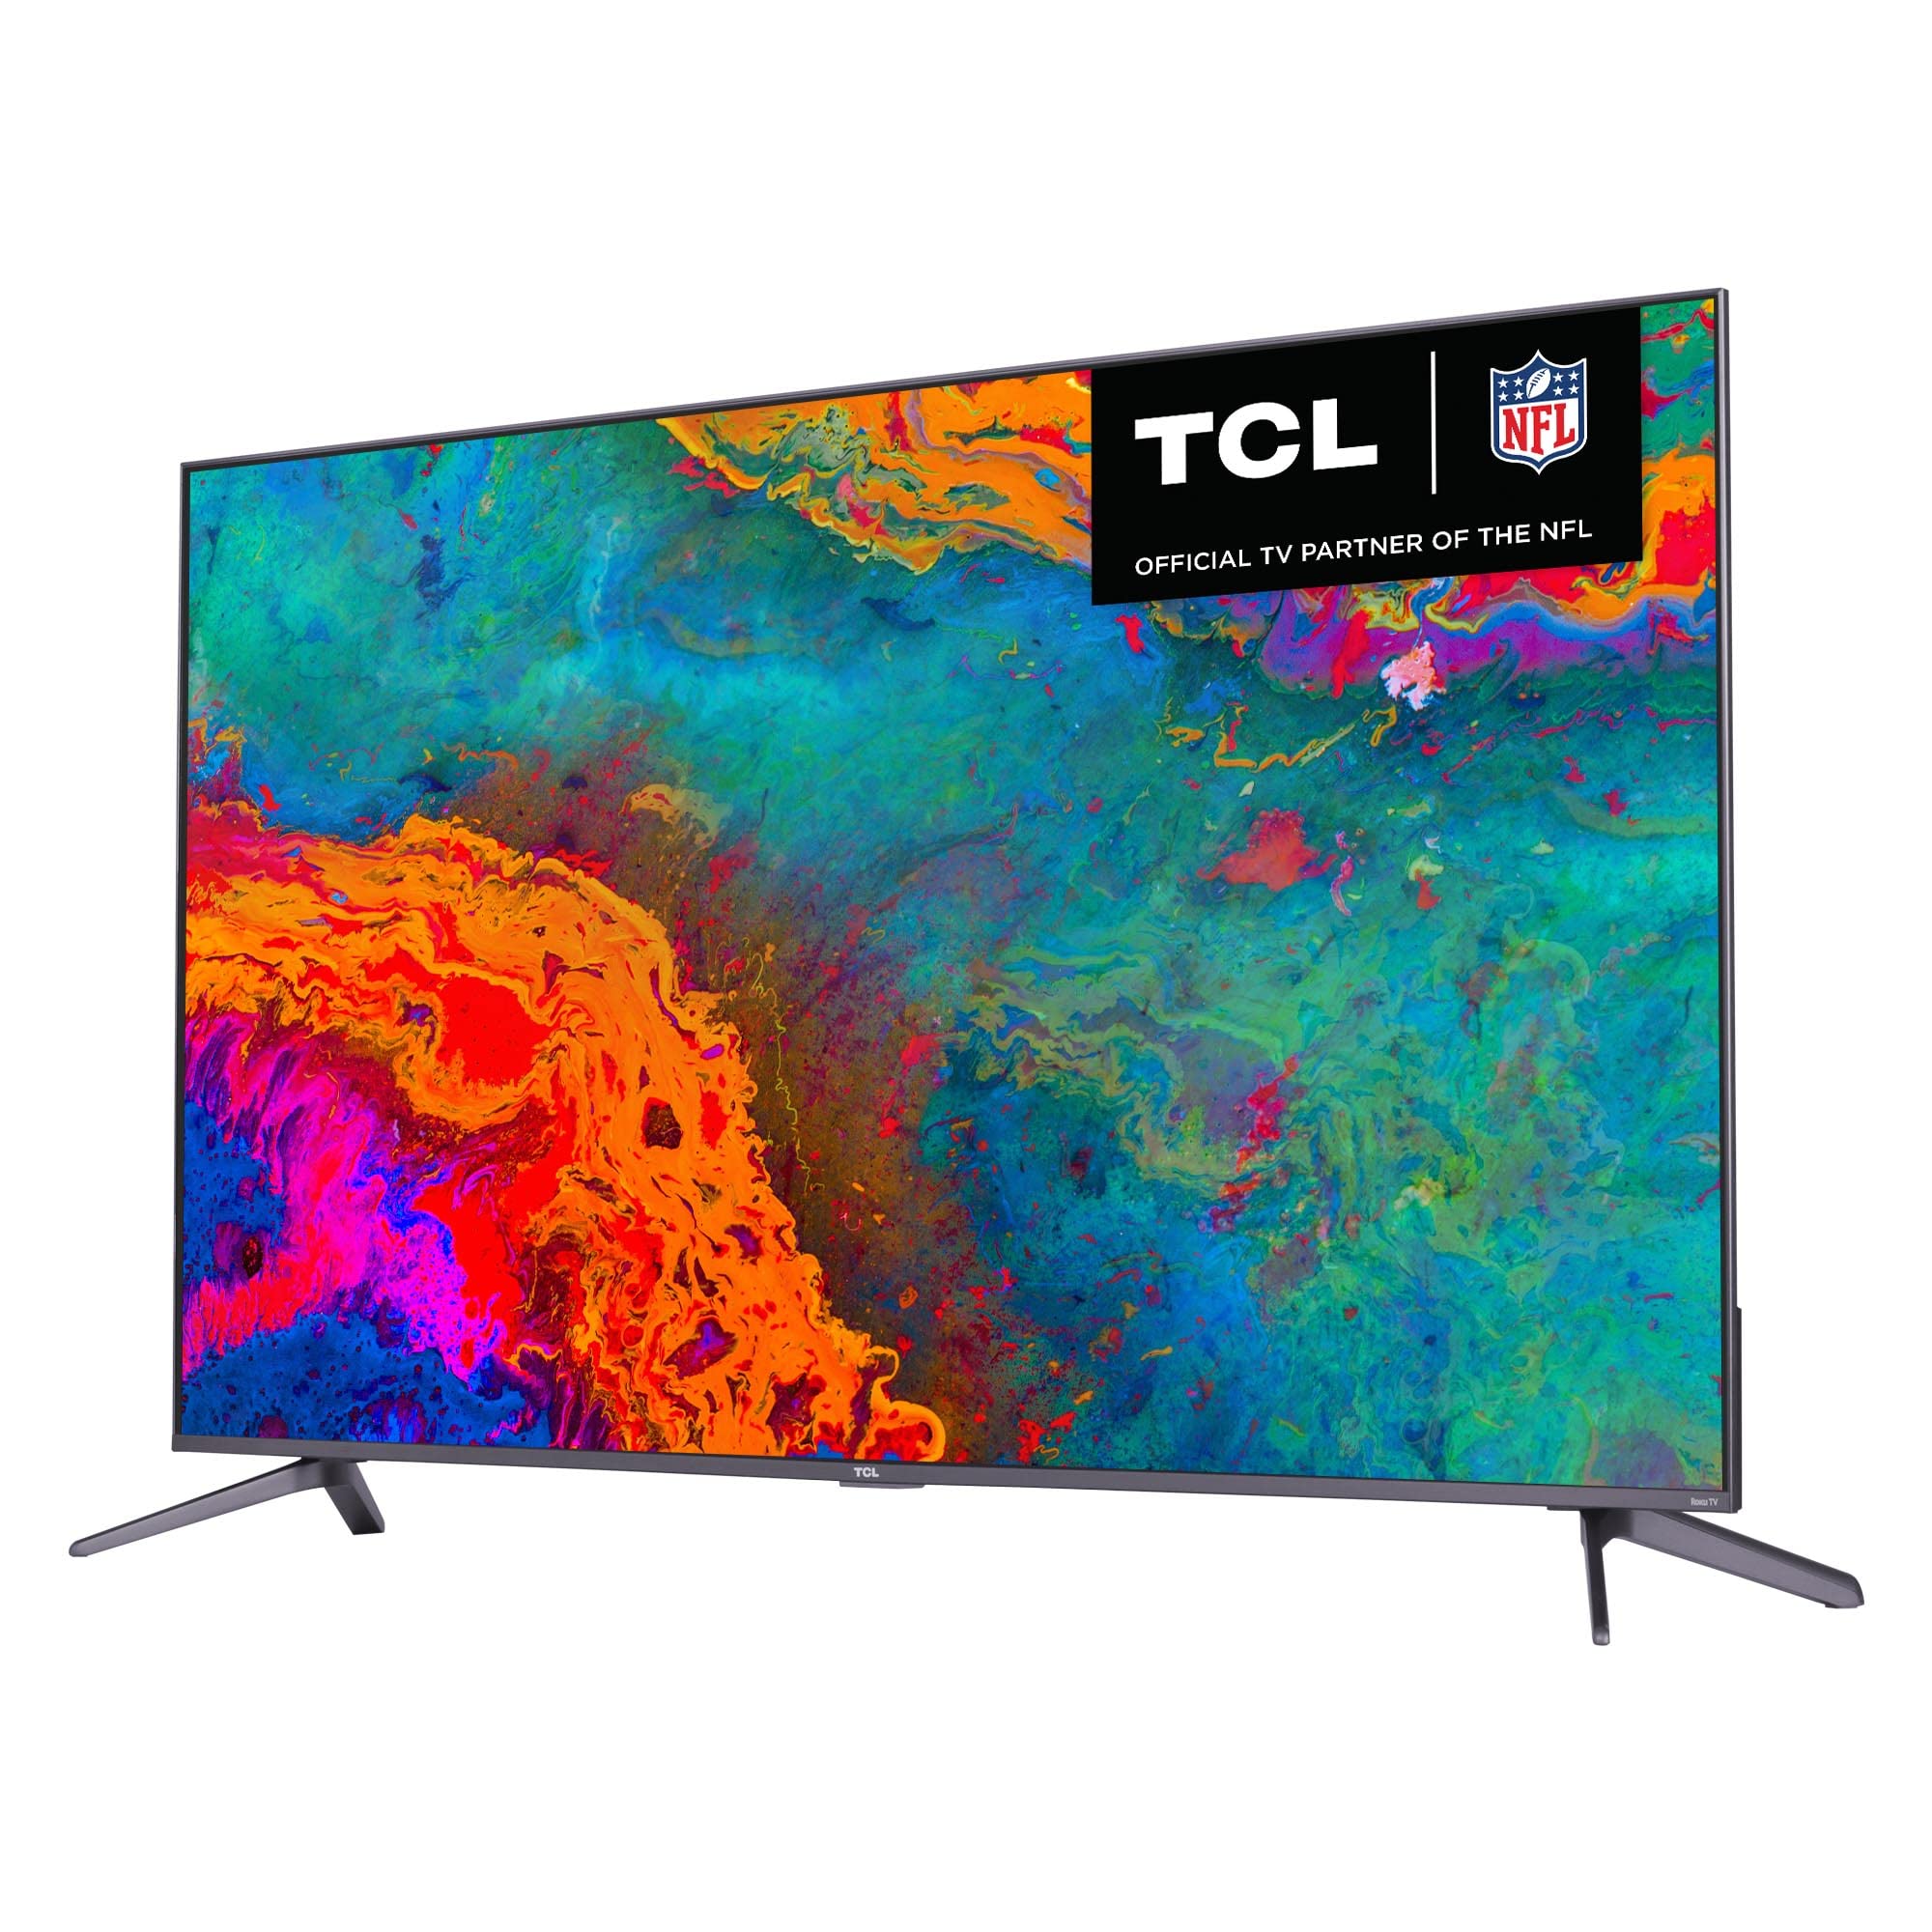 TCL 55-inch 5-Series 4K UHD Dolby Vision HDR QLED Roku Smart TV - 55S535, 2021 Model